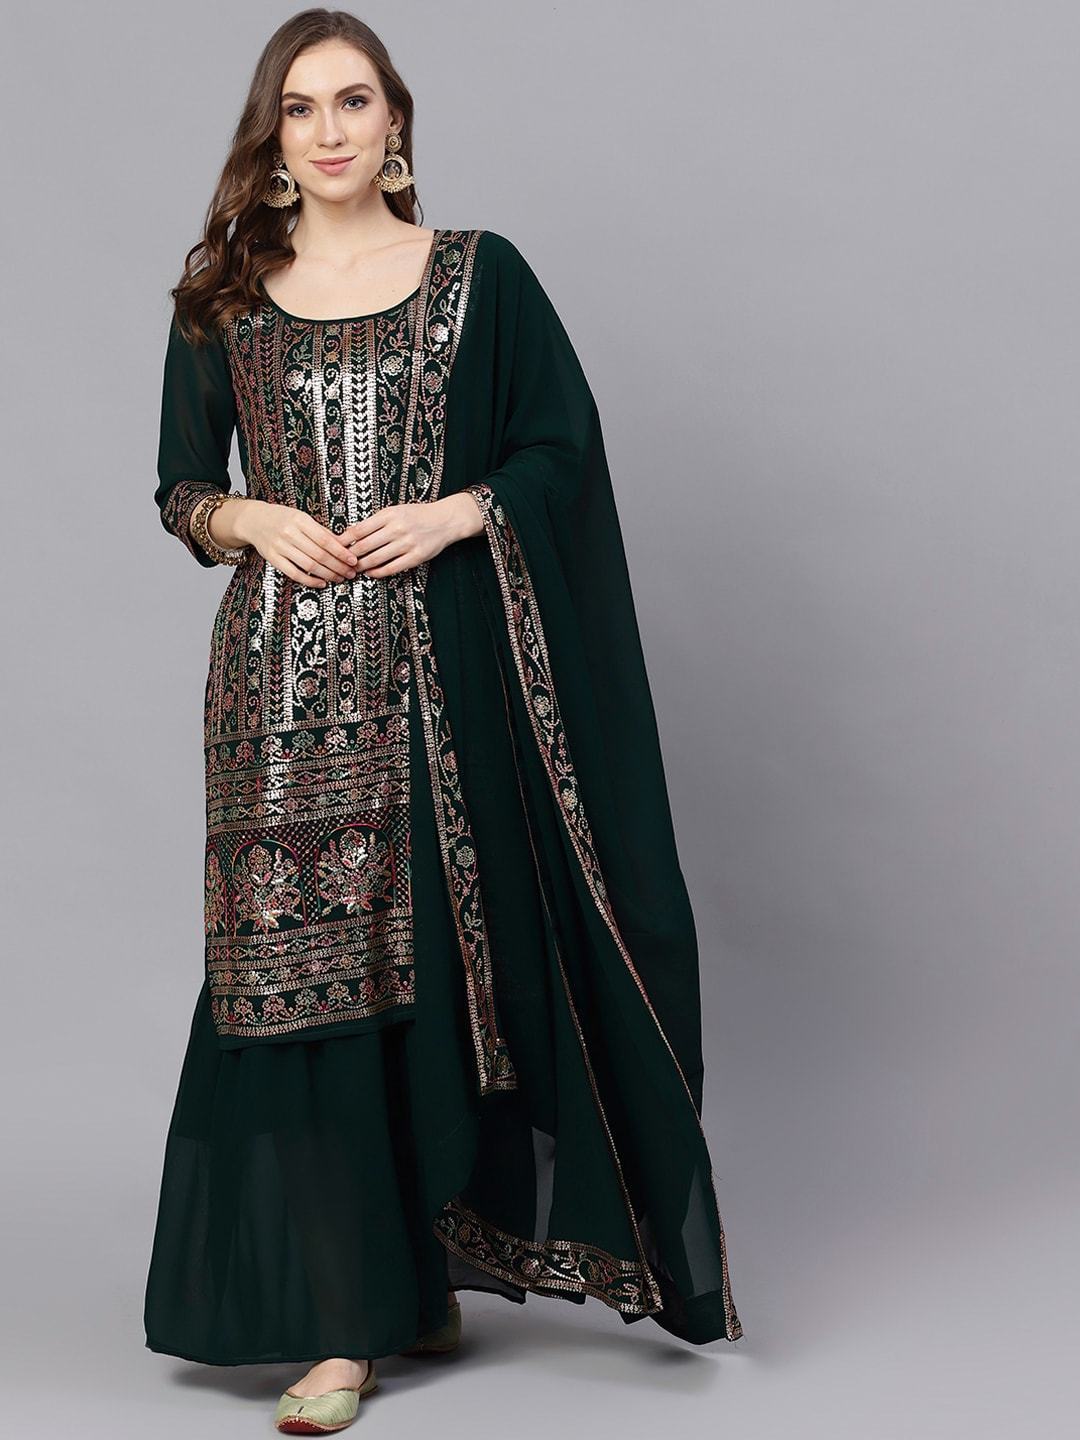 Women's  Green & Gold-Toned Embroidered Kurta with Palazzos & Dupatta - Final Clearance Sale